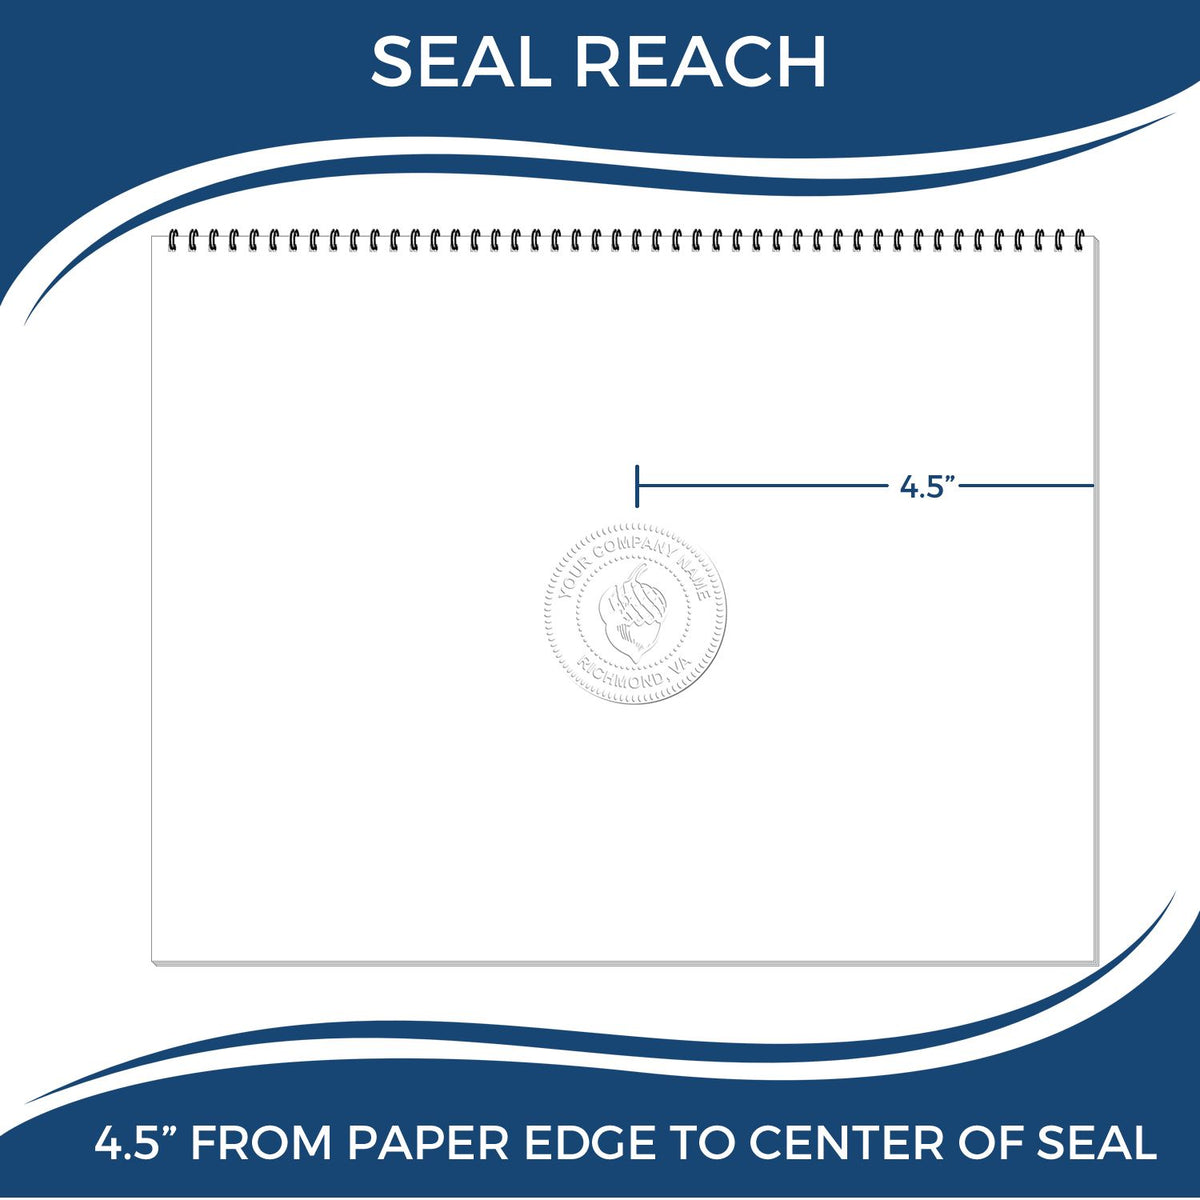 An infographic showing the seal reach which is represented by a ruler and a miniature seal image of the Extended Long Reach Colorado Surveyor Embosser